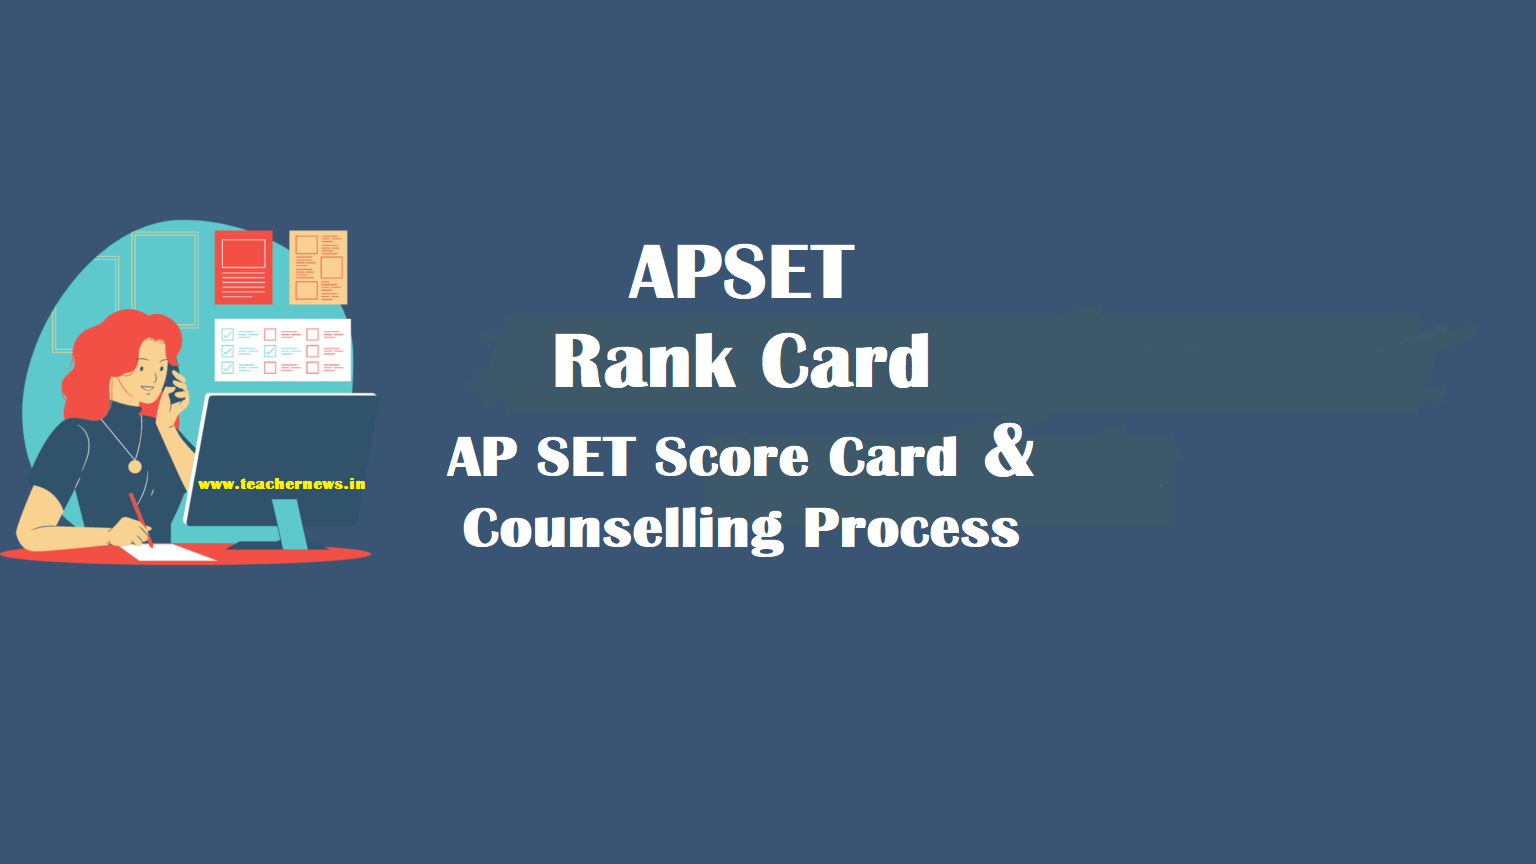 APSET Rank Card - AP SET Score Card & Counselling Process & Dates at apset.net.in